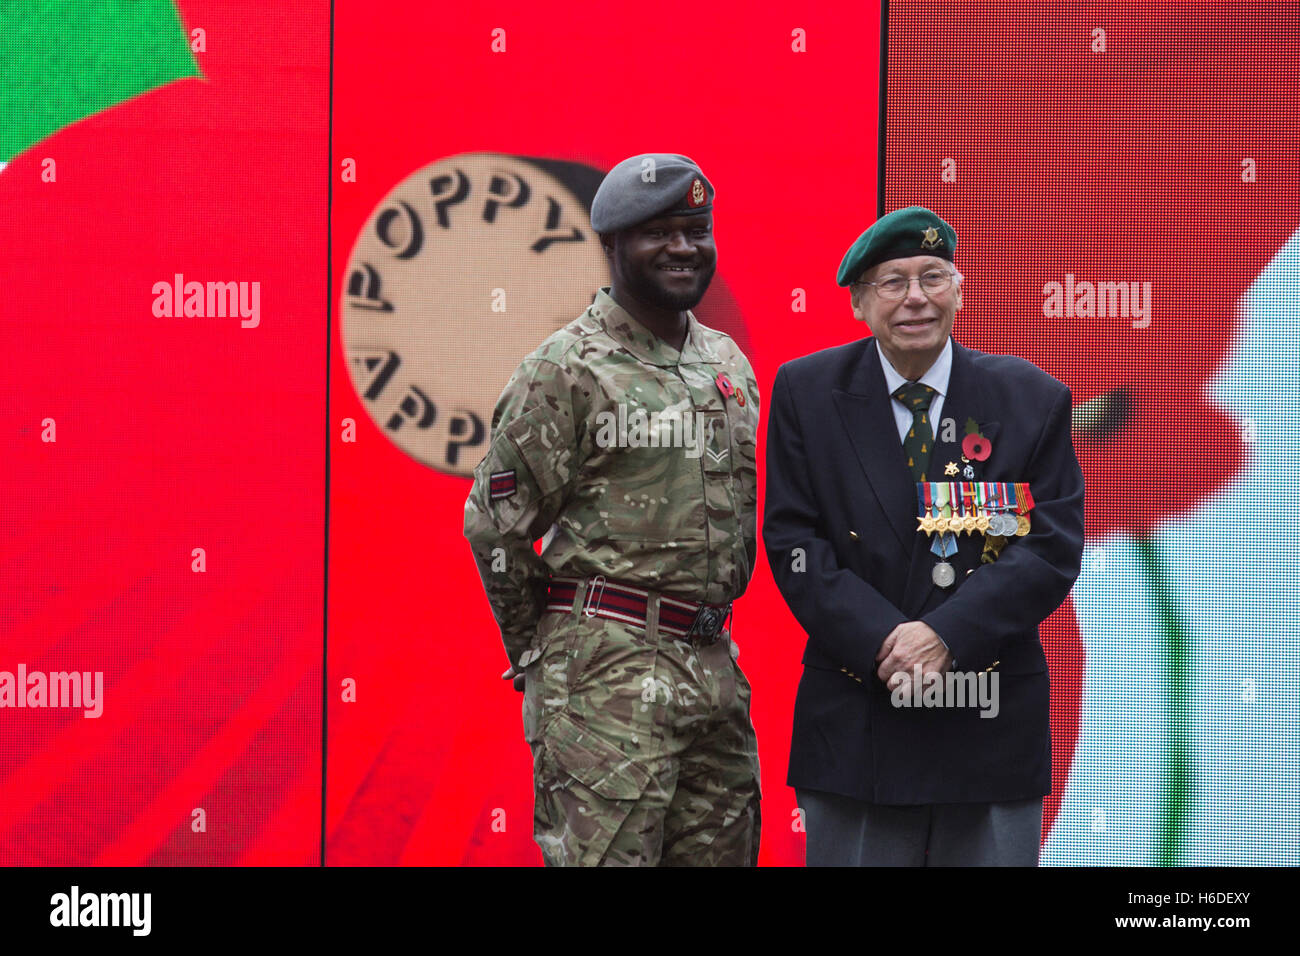 London, UK. 27 October 2016. Pictured: Ben Poku, 34, and Roy Miller, 92. The Royal British Legion’s Poppy Appeal 2016 launches today, Thursday 27 October 2016, with the unveiling of giant video installation in Central London, inviting people to rethink Remembrance. Credit:  Bettina Strenske/Alamy Live News Stock Photo